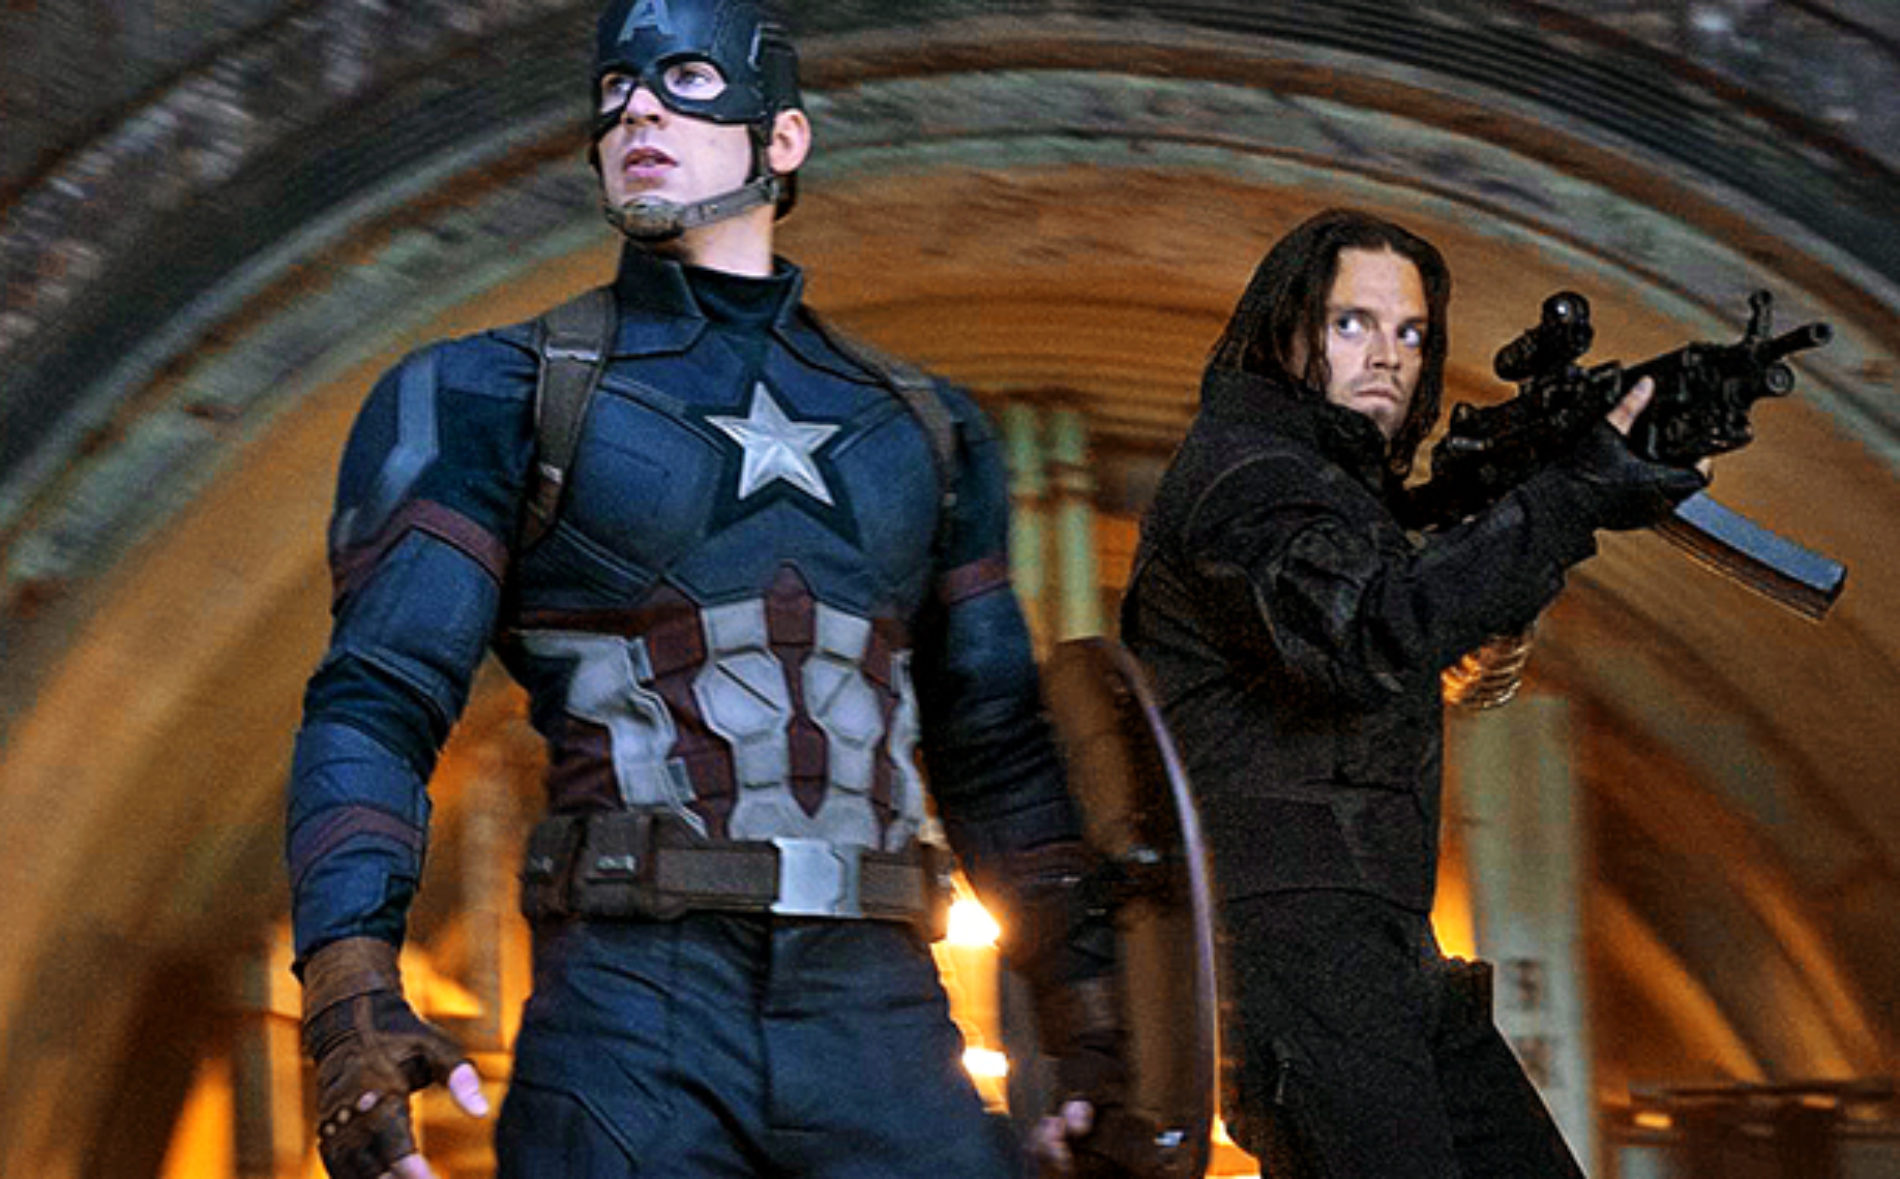 #GiveCaptainAmericaABoyfriend: Twitter wants a boyfriend for Captain America